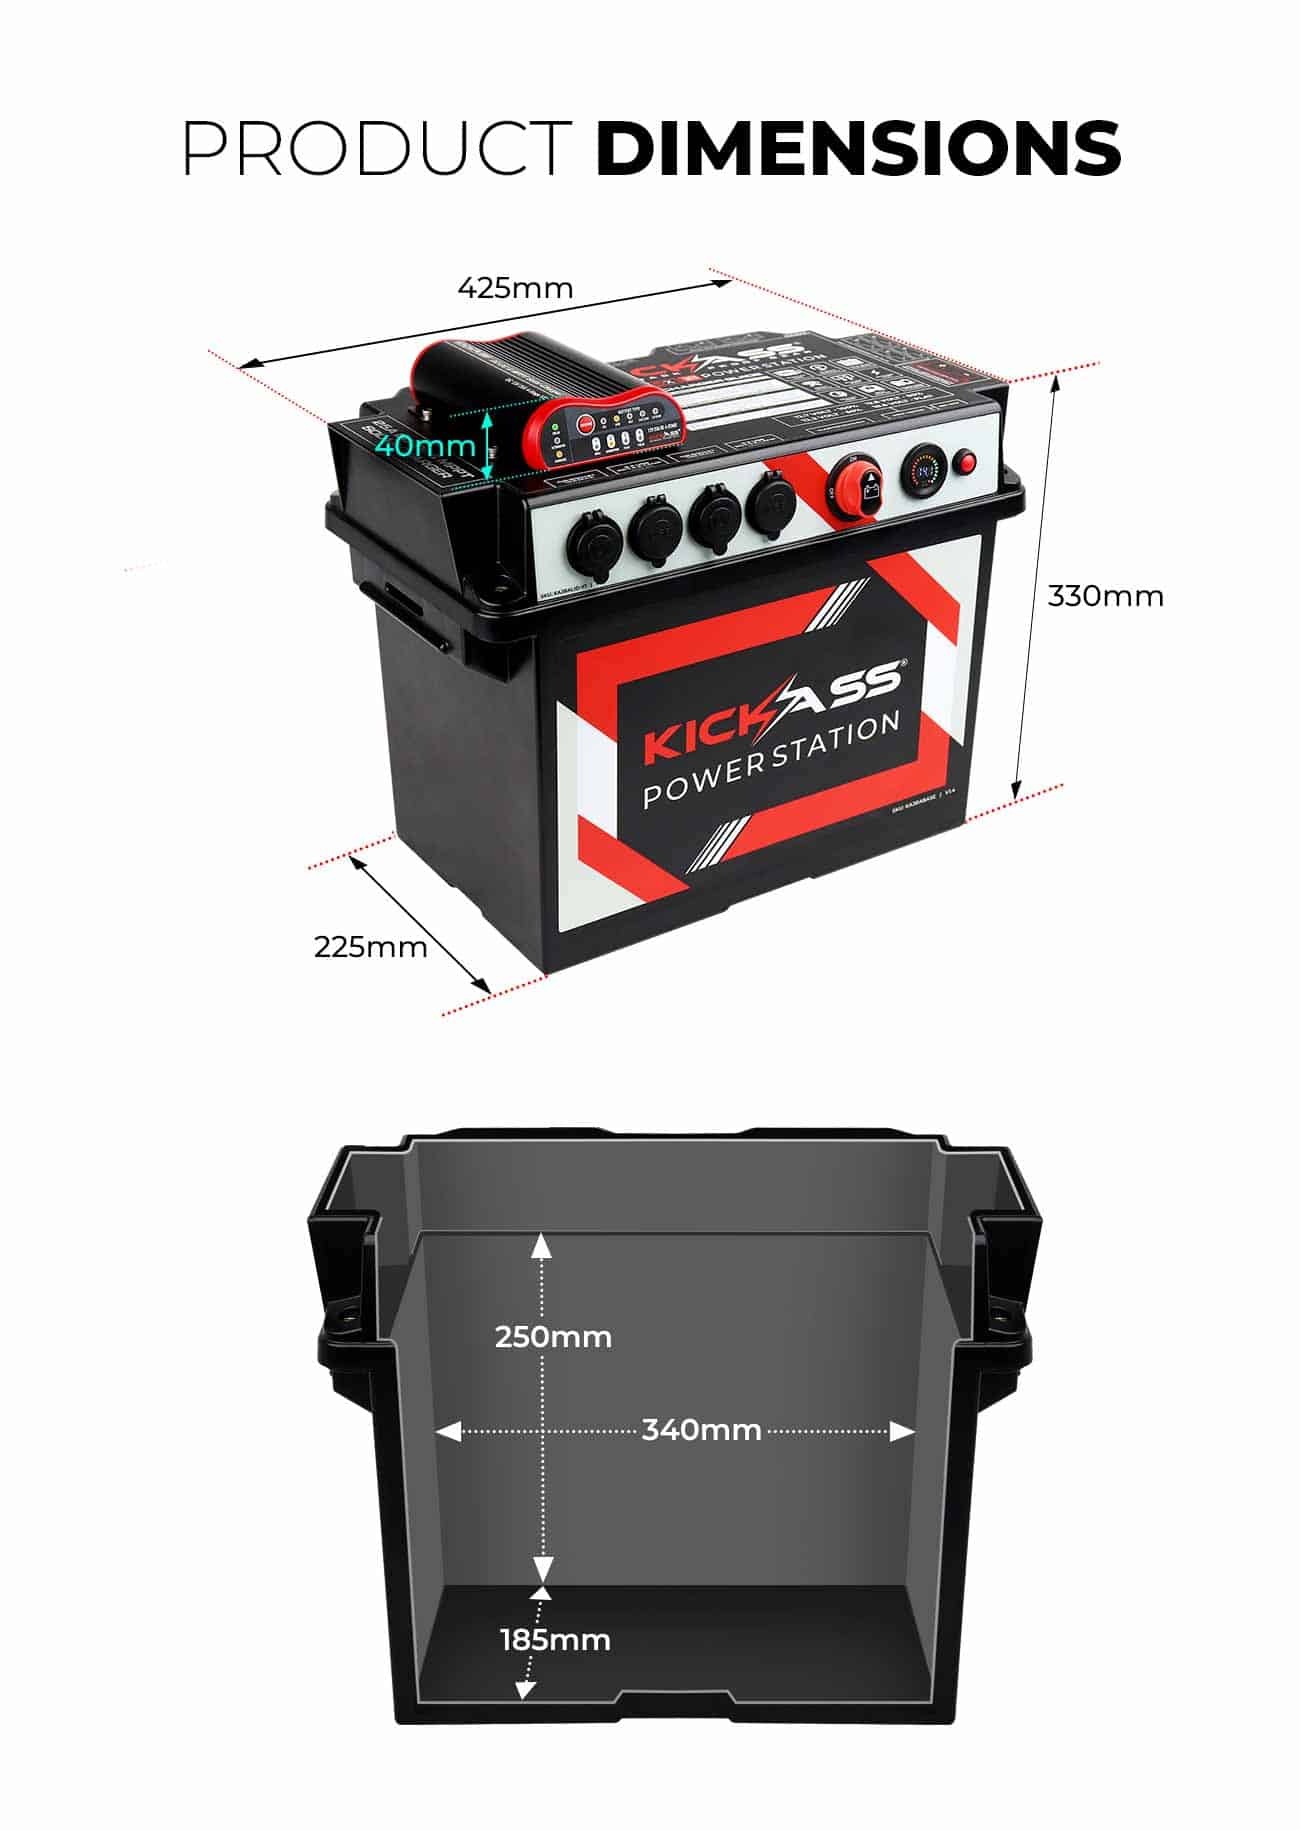 Portable Battery Box Power Station with Integrated 25A DC-DC Charger - Product Dimensions